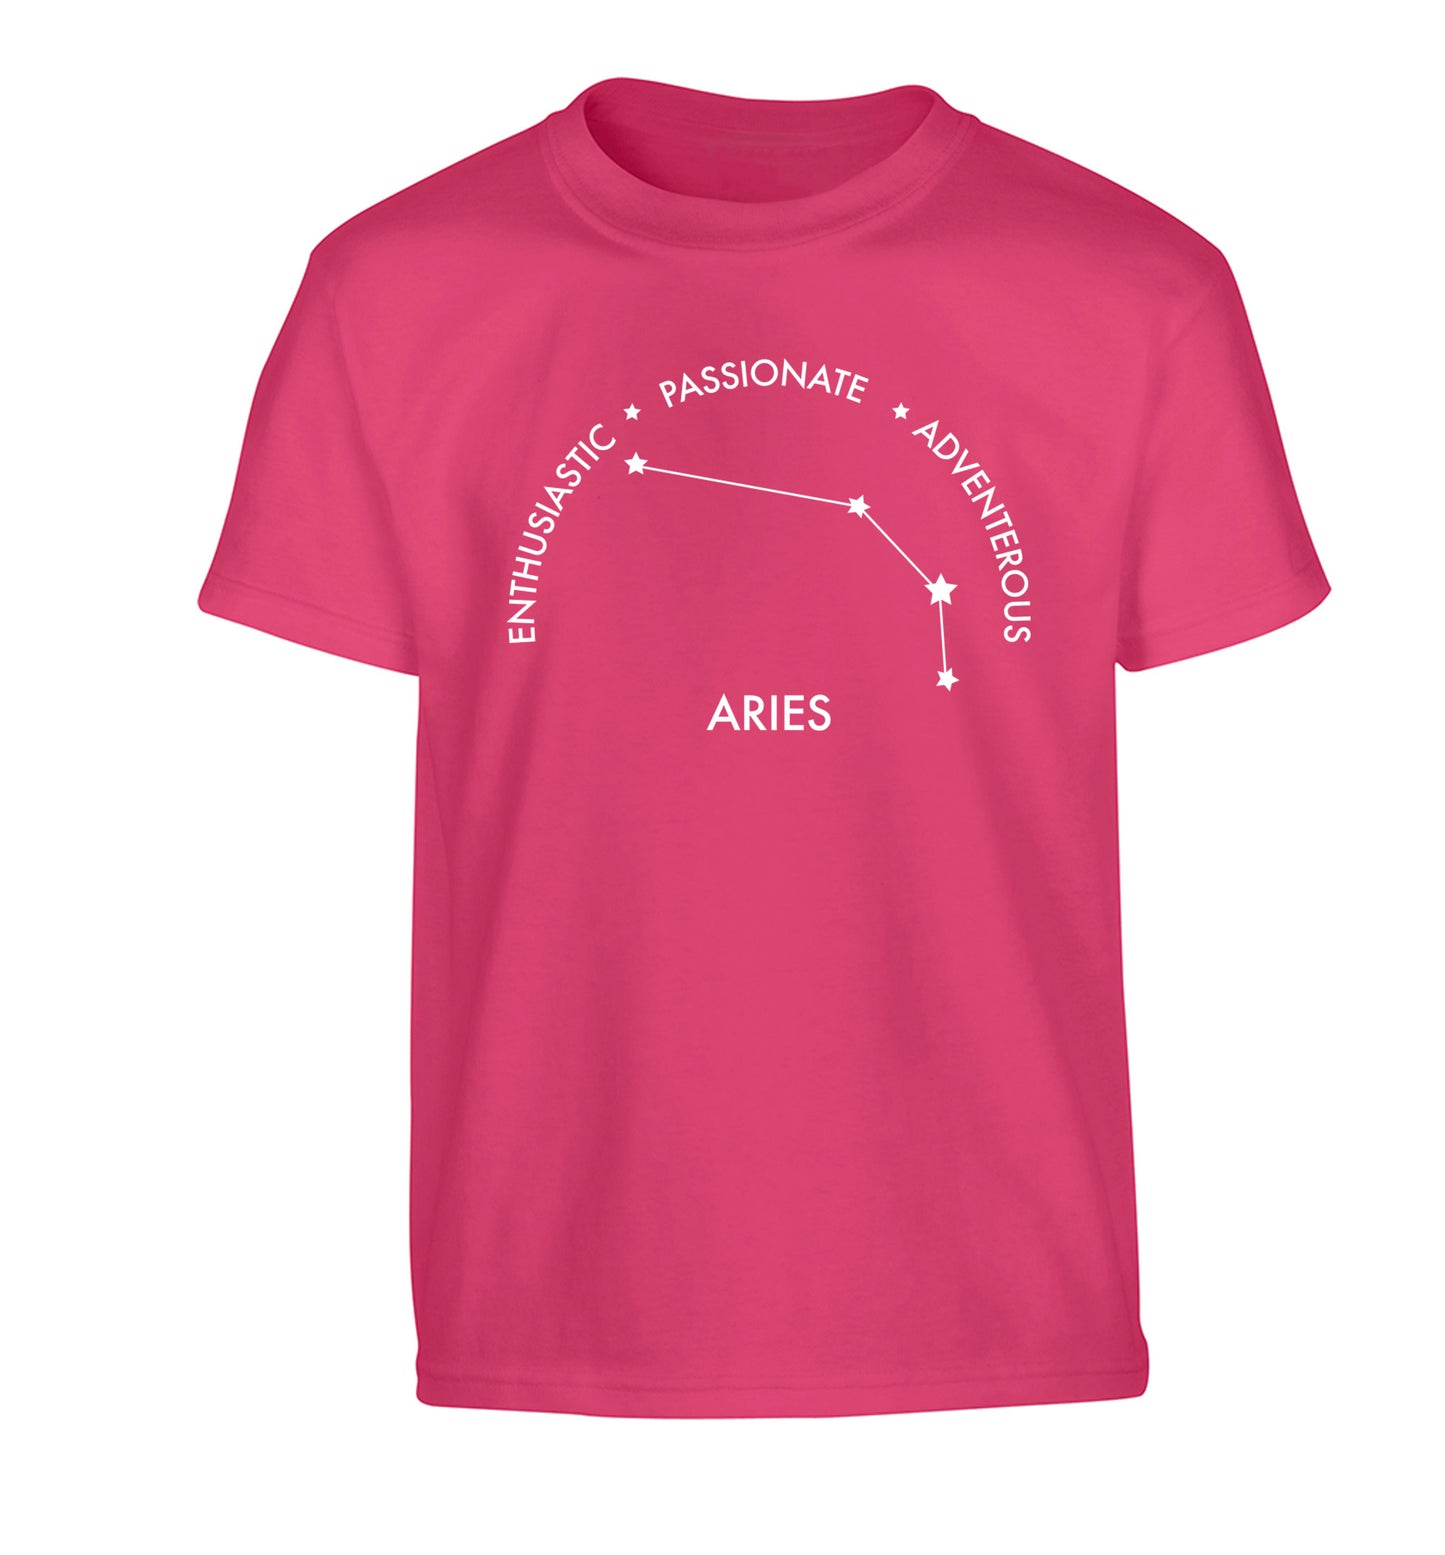 Aries enthusiastic | passionate | adventerous Children's pink Tshirt 12-13 Years